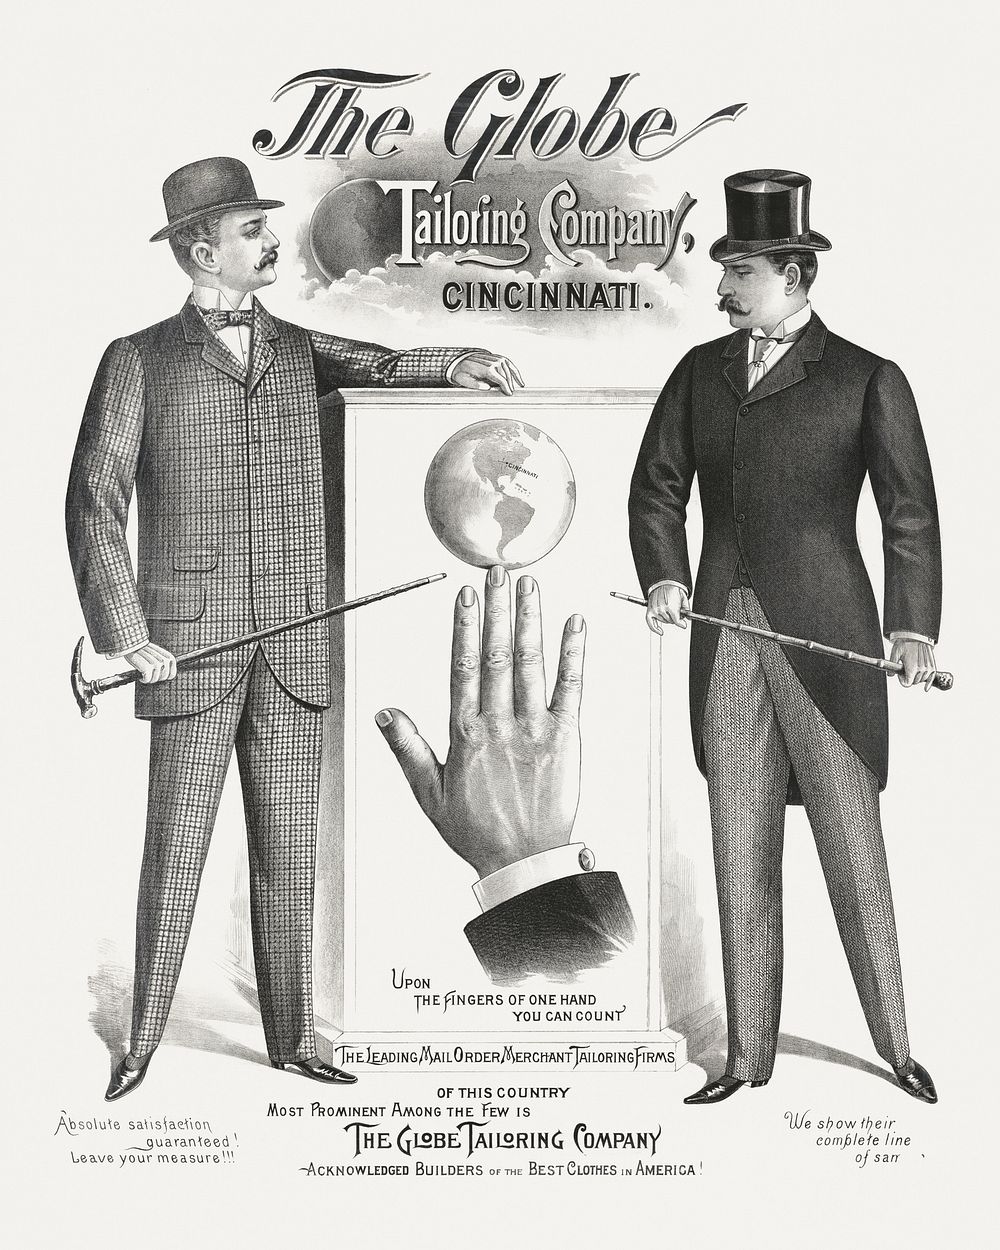 The Globe Tailoring Company, Cincinnati. Upon the fingers of one hand you can count the leading mail order merchant…